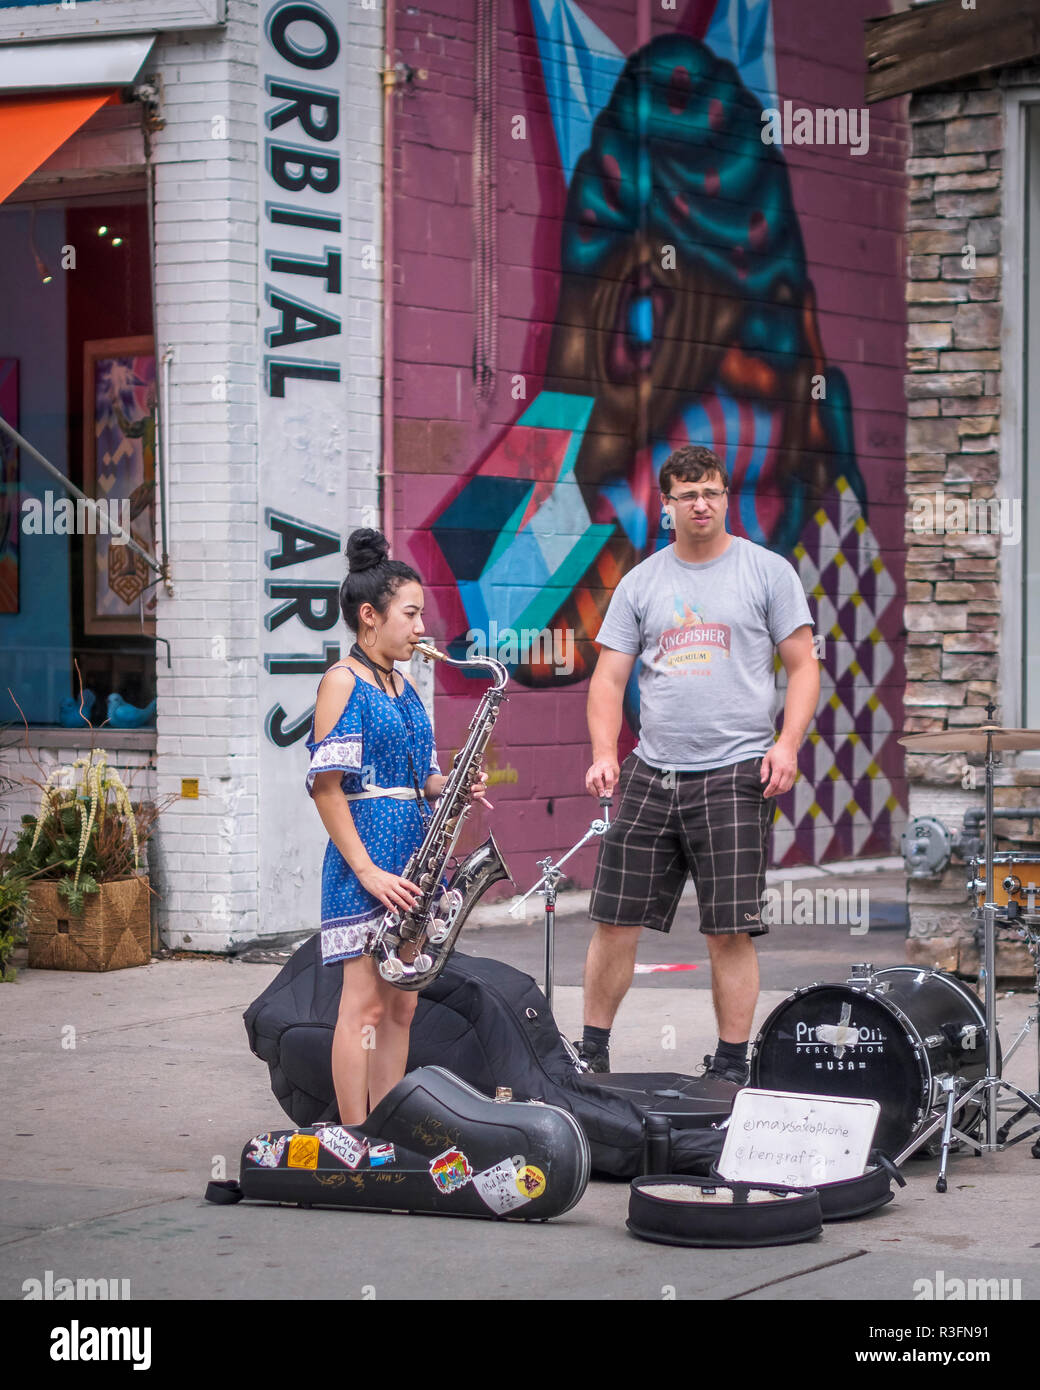 A girl playing saxophone, street performance, during summers in Kensington Market, Toronto, Ontario, Canada Stock Photo